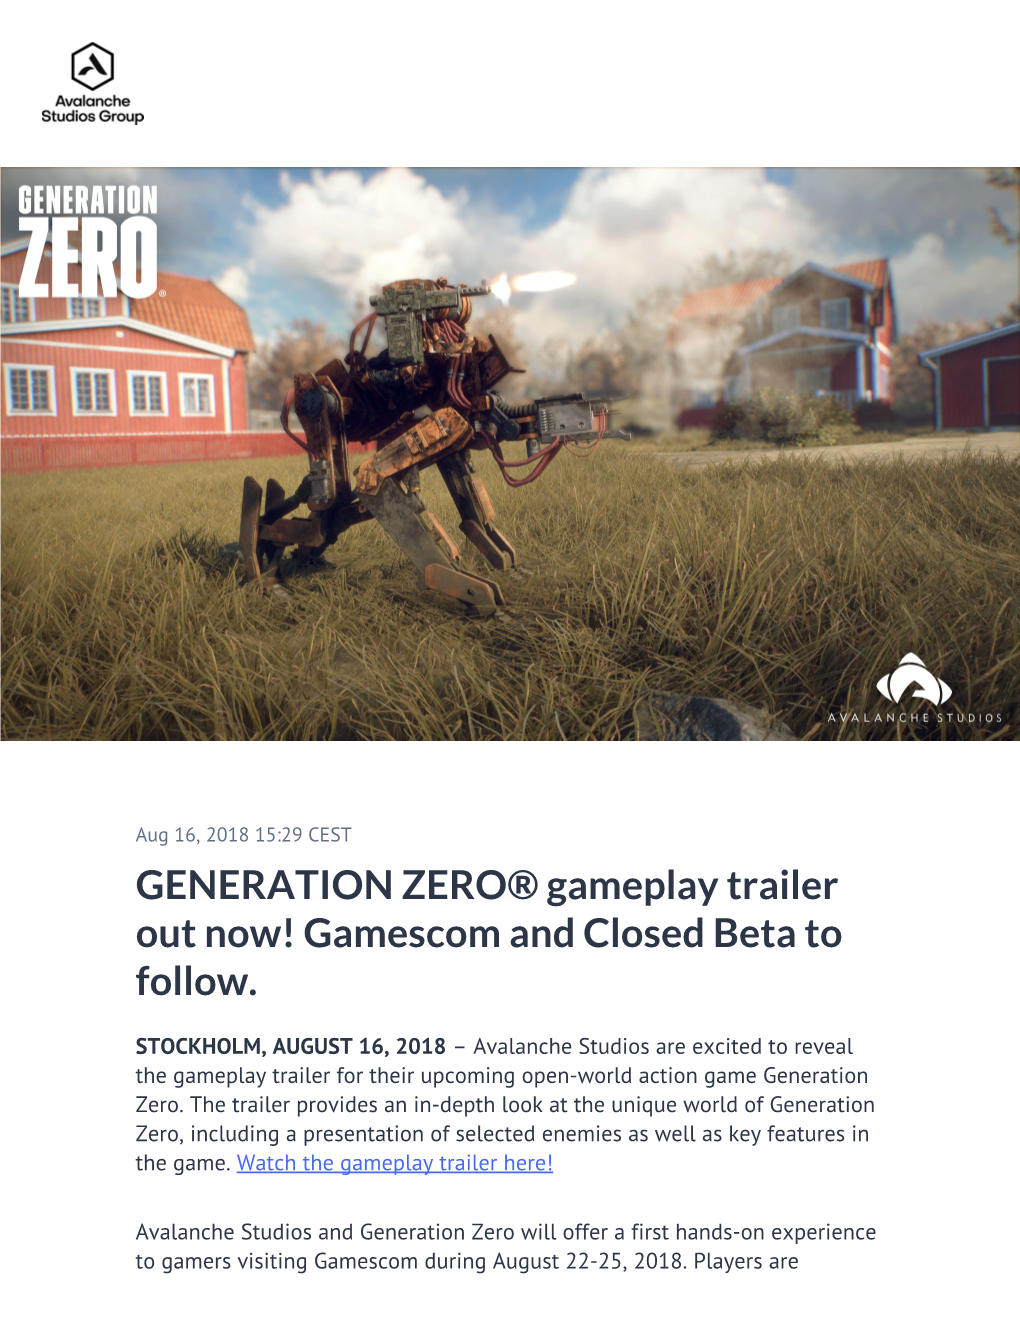 GENERATION ZERO® Gameplay Trailer out Now! Gamescom and Closed Beta to Follow